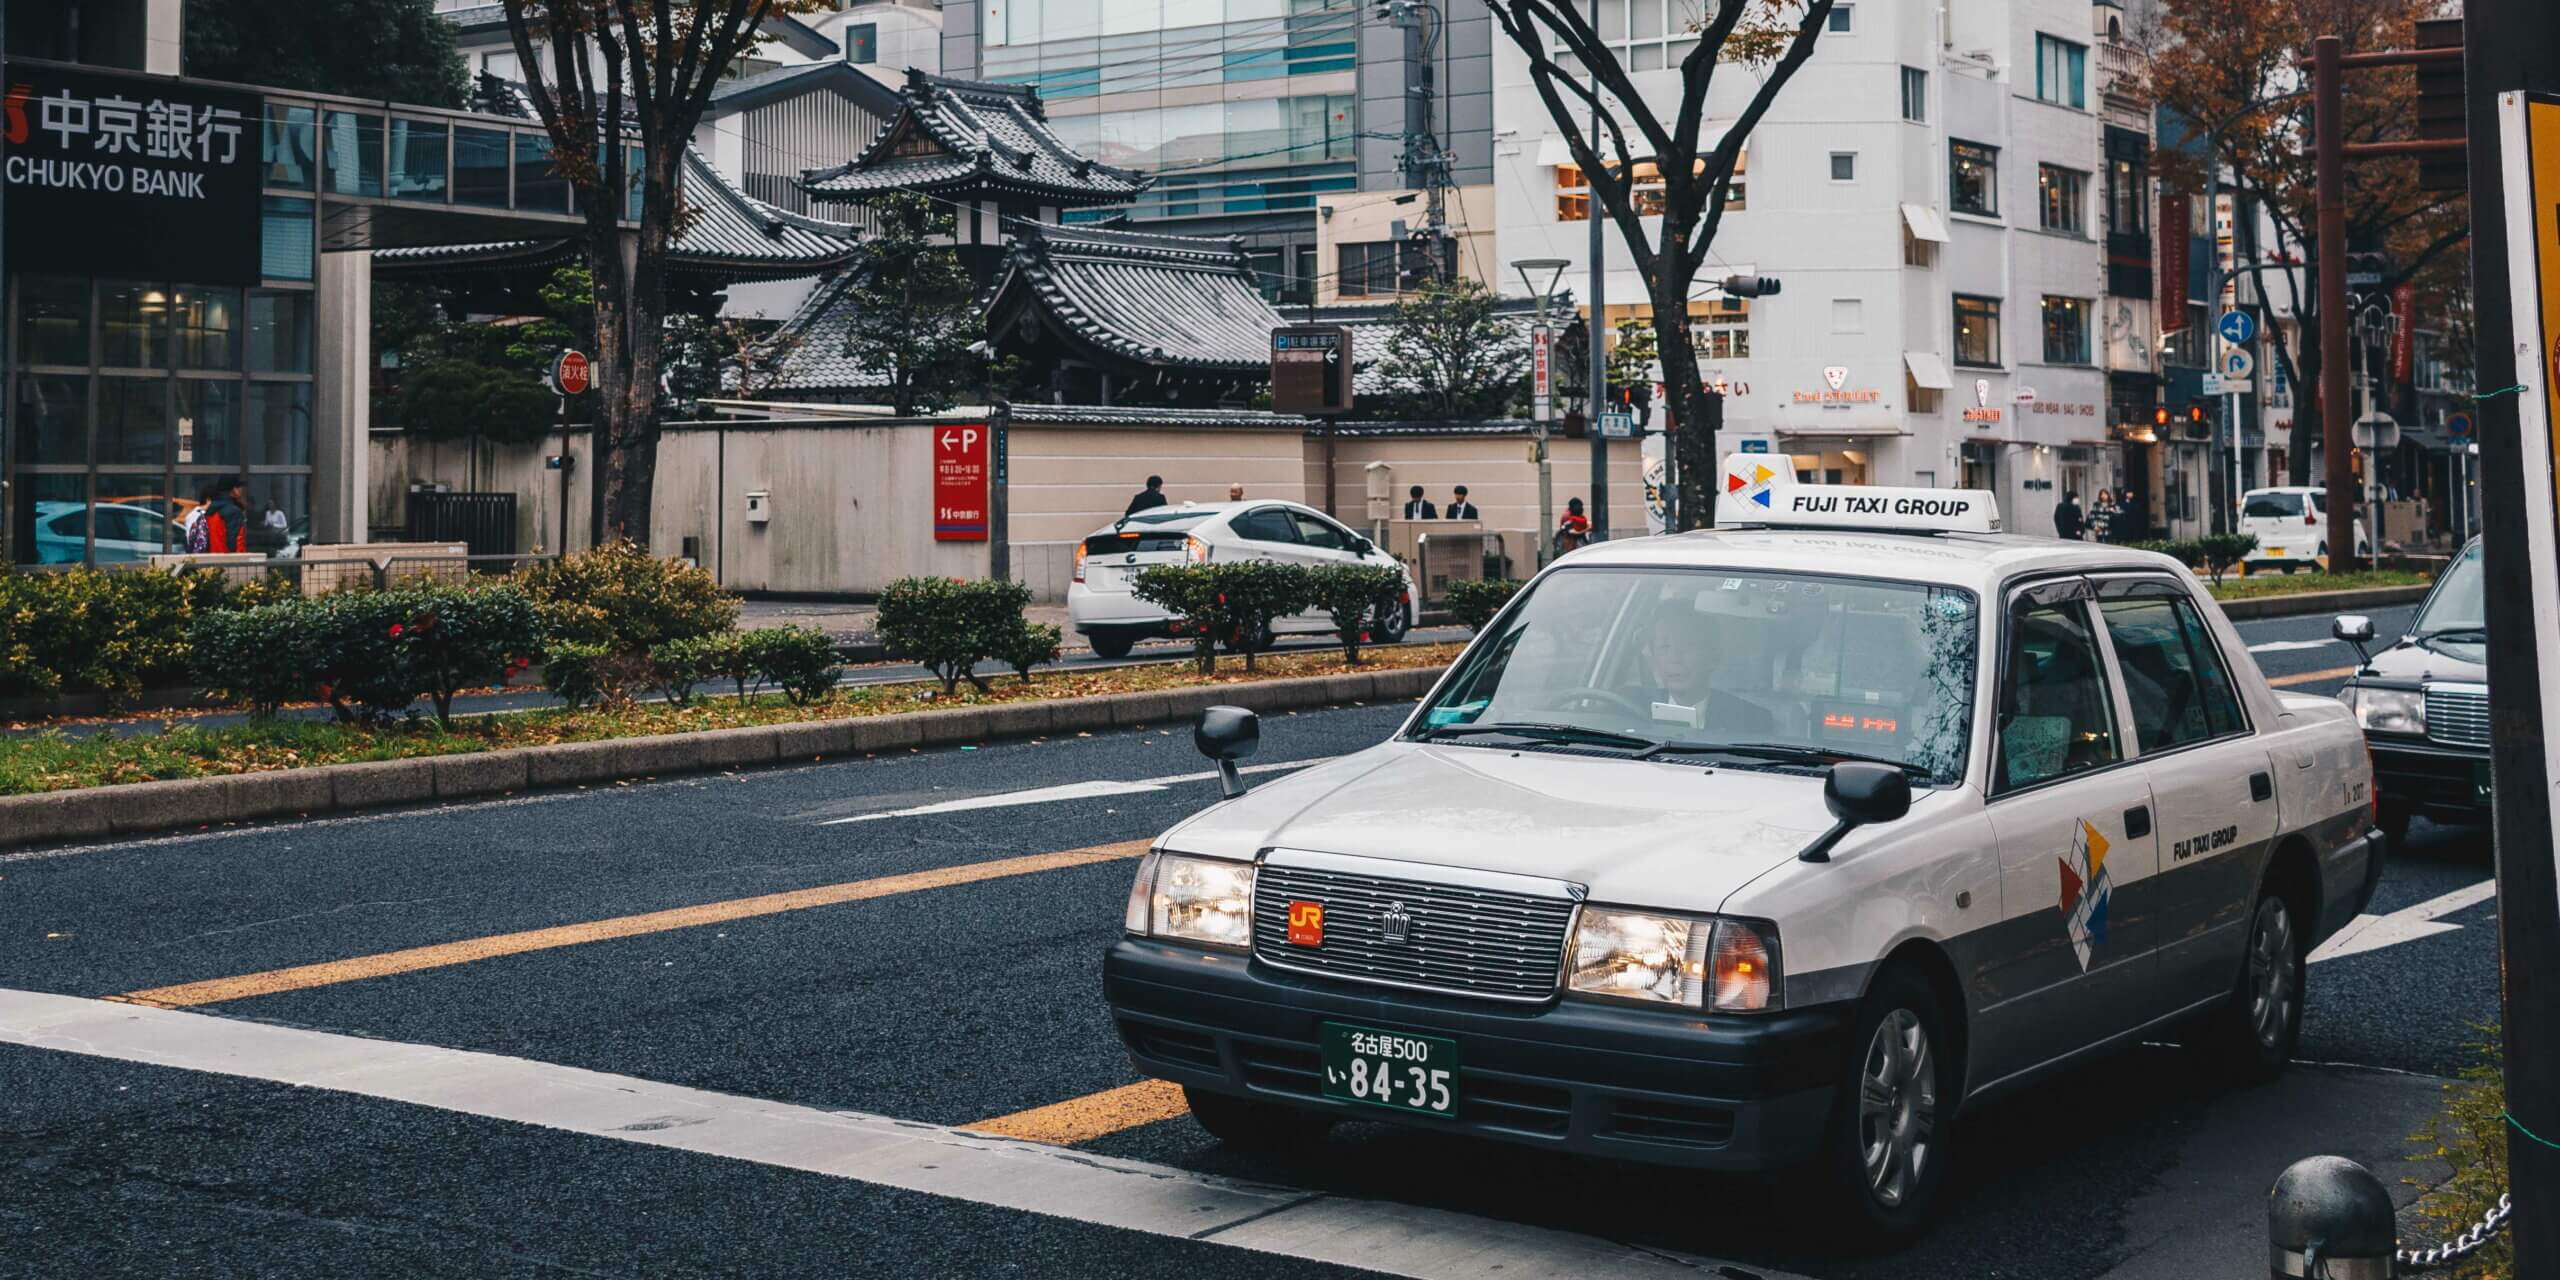 Japan taxi license plate reader